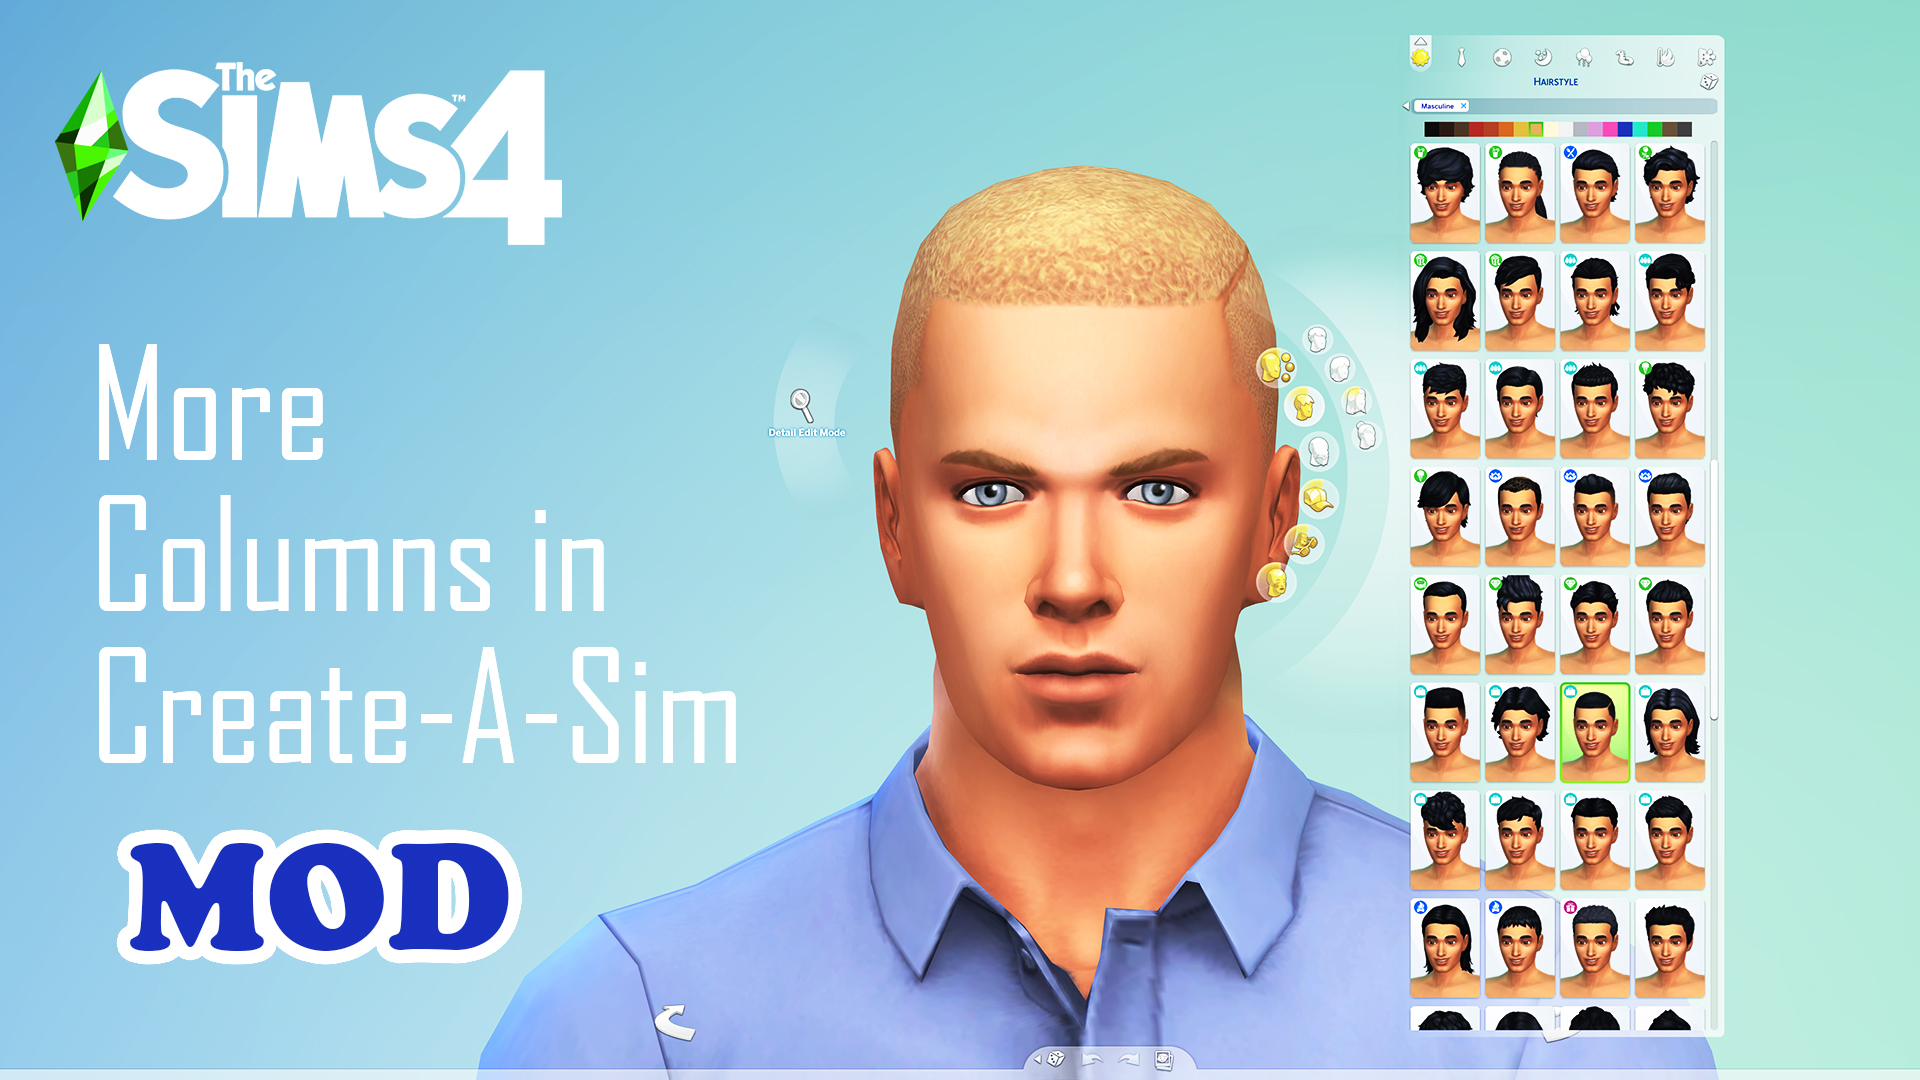 Custom Content Archives - Page 76 of 76 - The Sims Guide